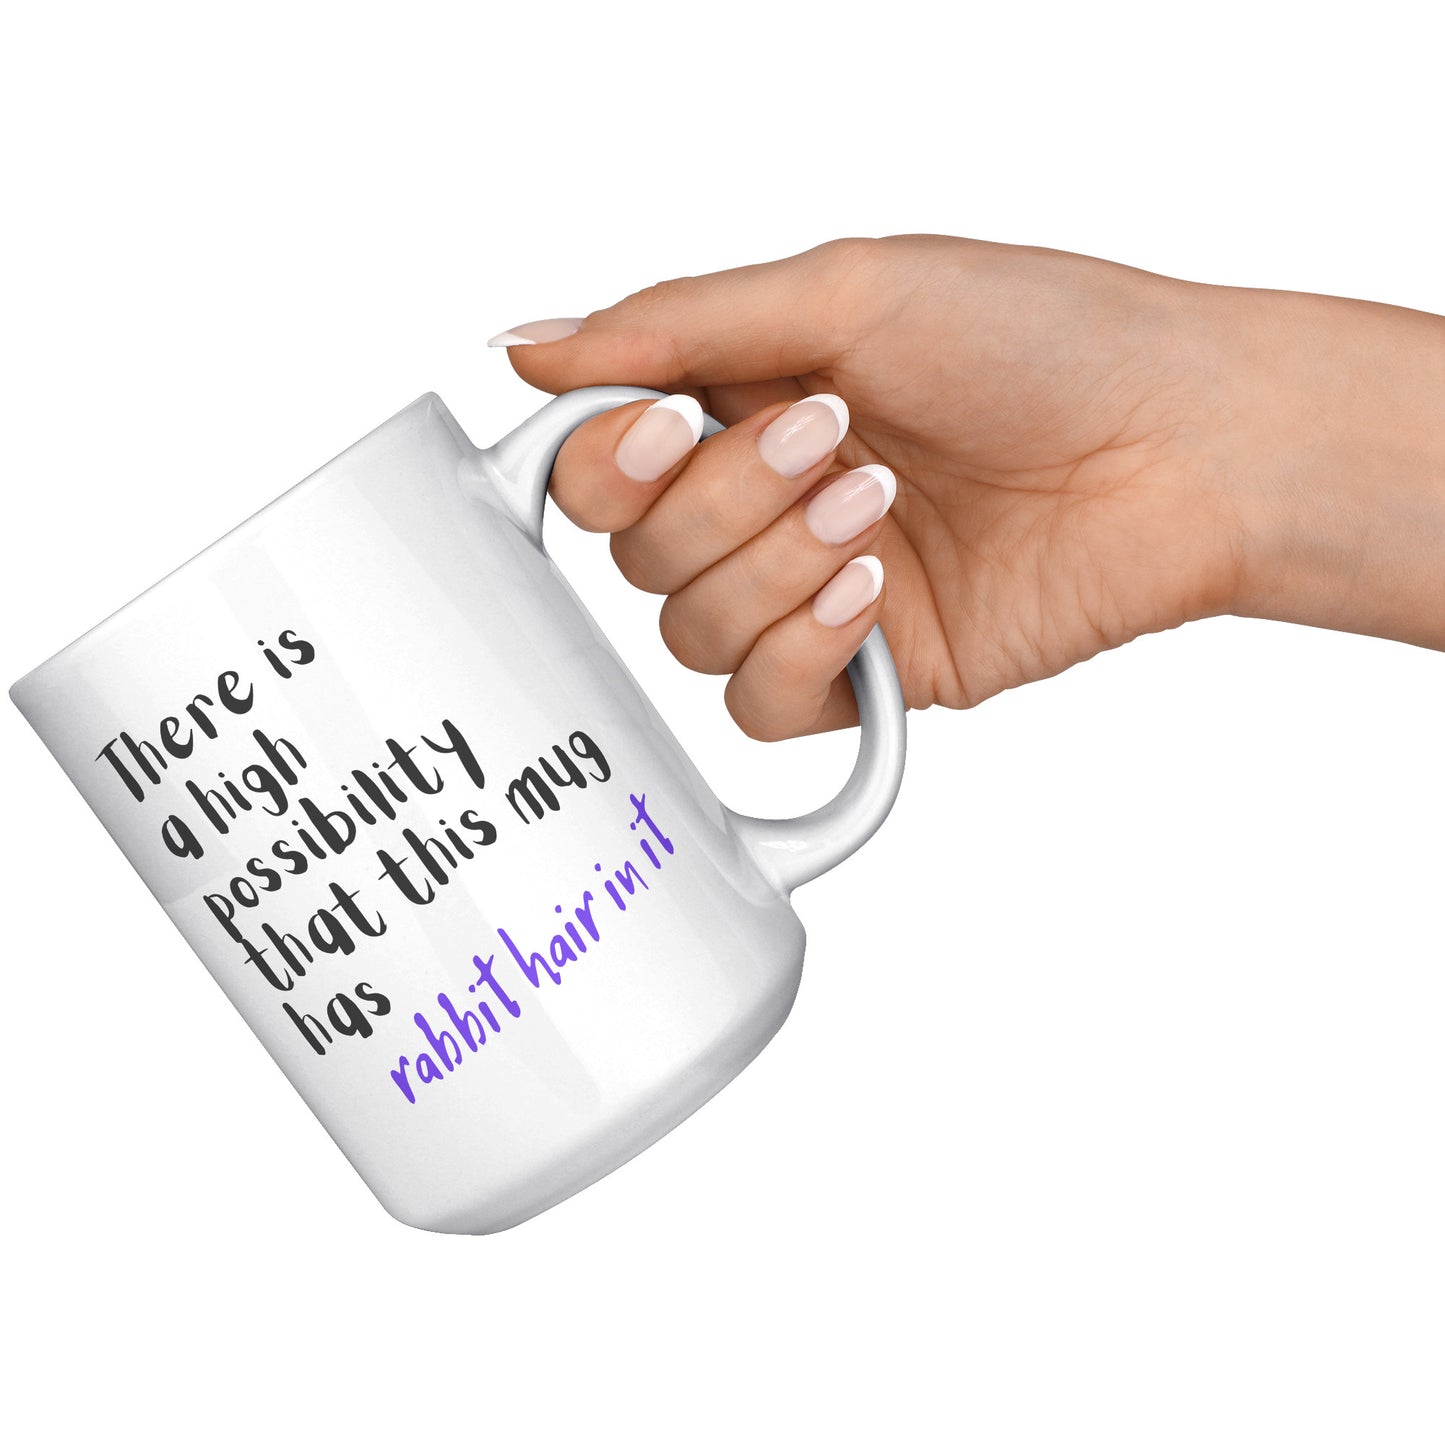 Comical Mug for the Rabbit Lover that Loves Coffee as Well